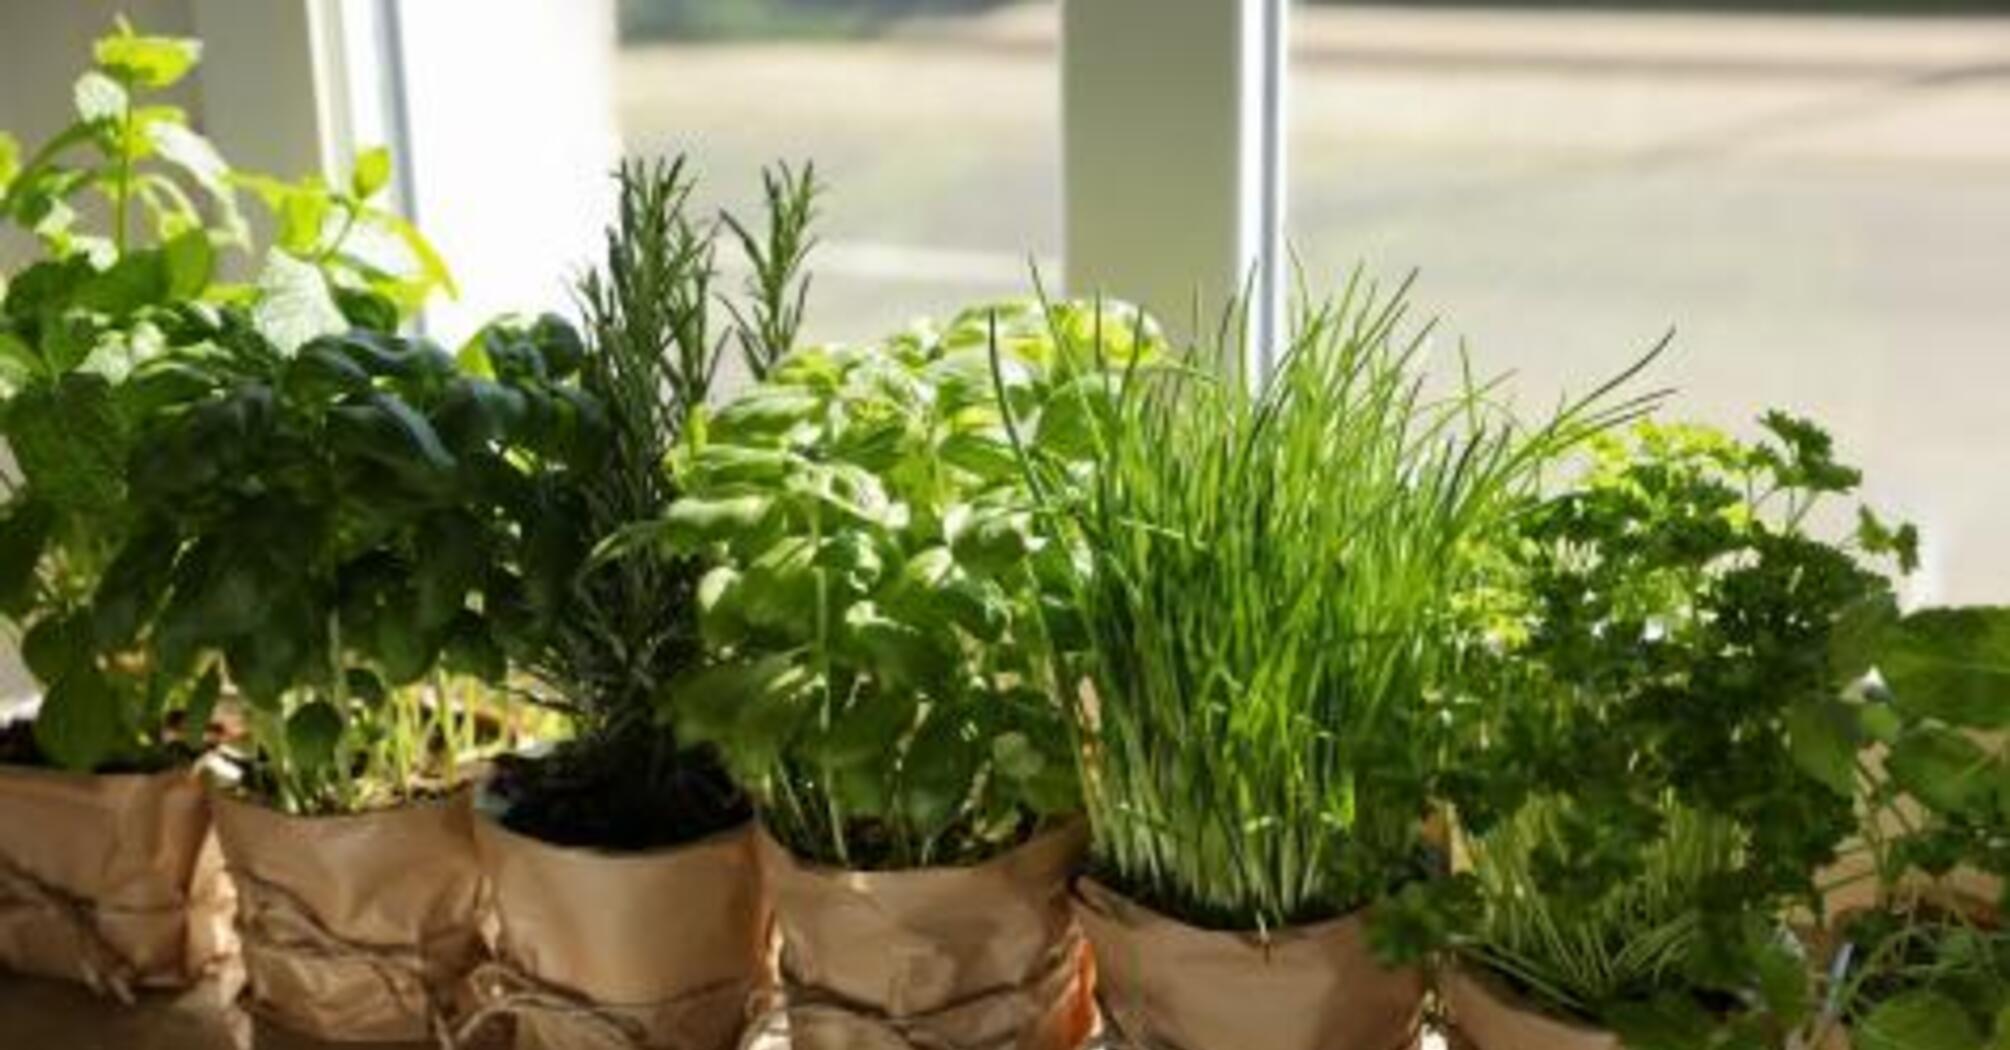 How to create your own "herb garden"